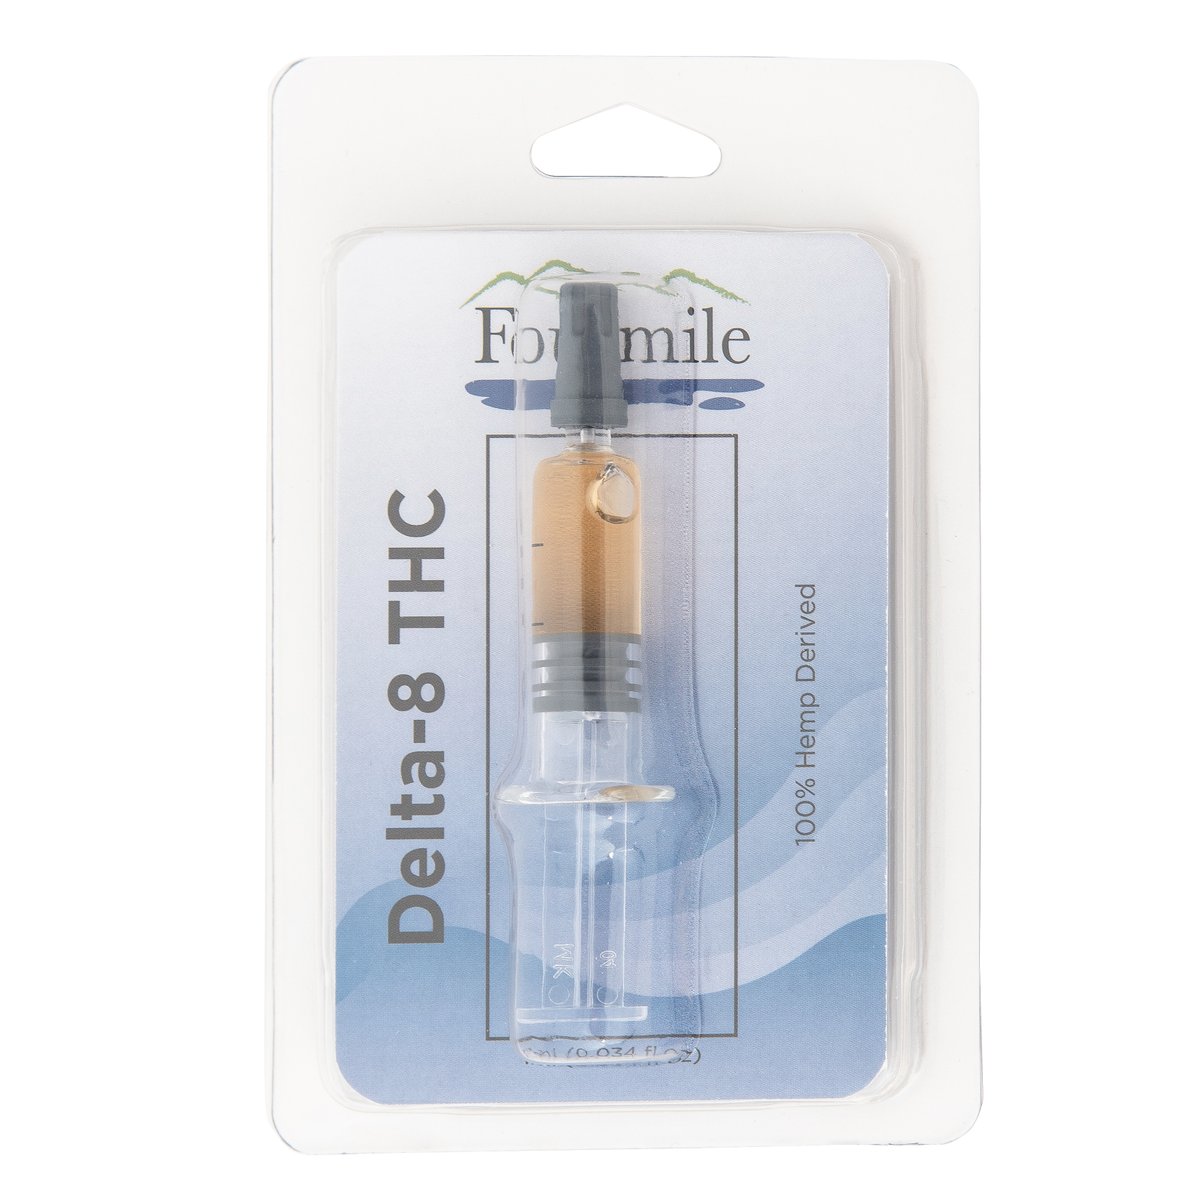 If you’re about homemade edibles try Delta-8 distillate it's a versatile product that can be put in tinctures, edibles, or even smoked.

#delta8 #delta8thc #delta8gummies #delta8flower #delta8cartridges #delta8edibles #delta8carts #hemp #cannabis #cbd #cbdhealth #d8 #hempflower